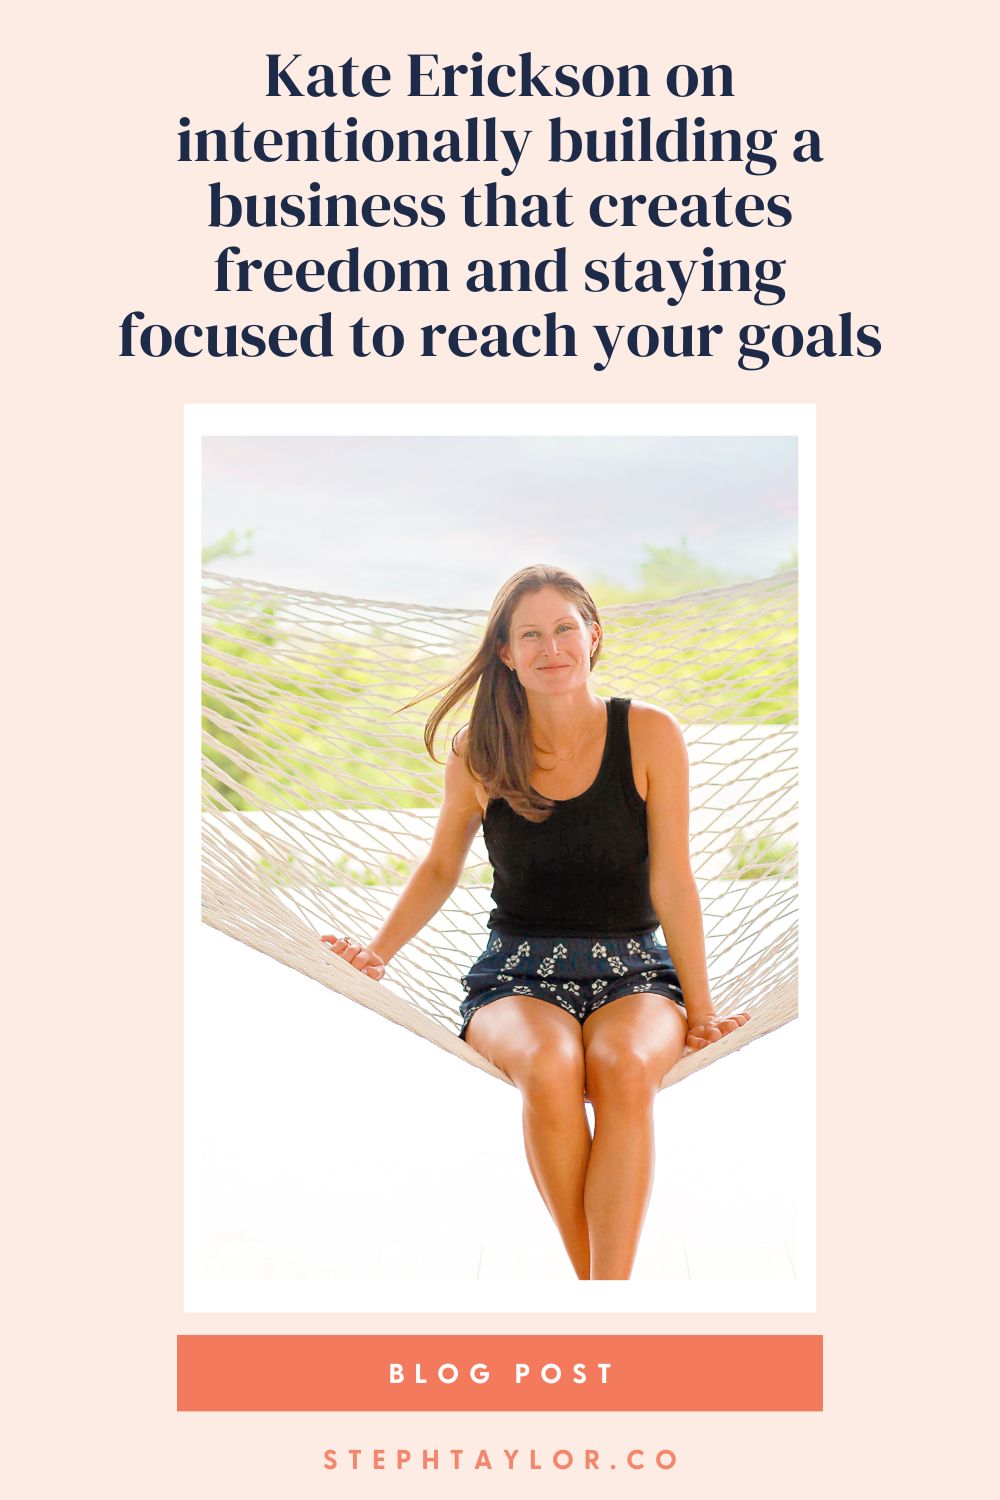 Kate Erickson on intentionally building a business that creates freedom and staying focused to reach your goals